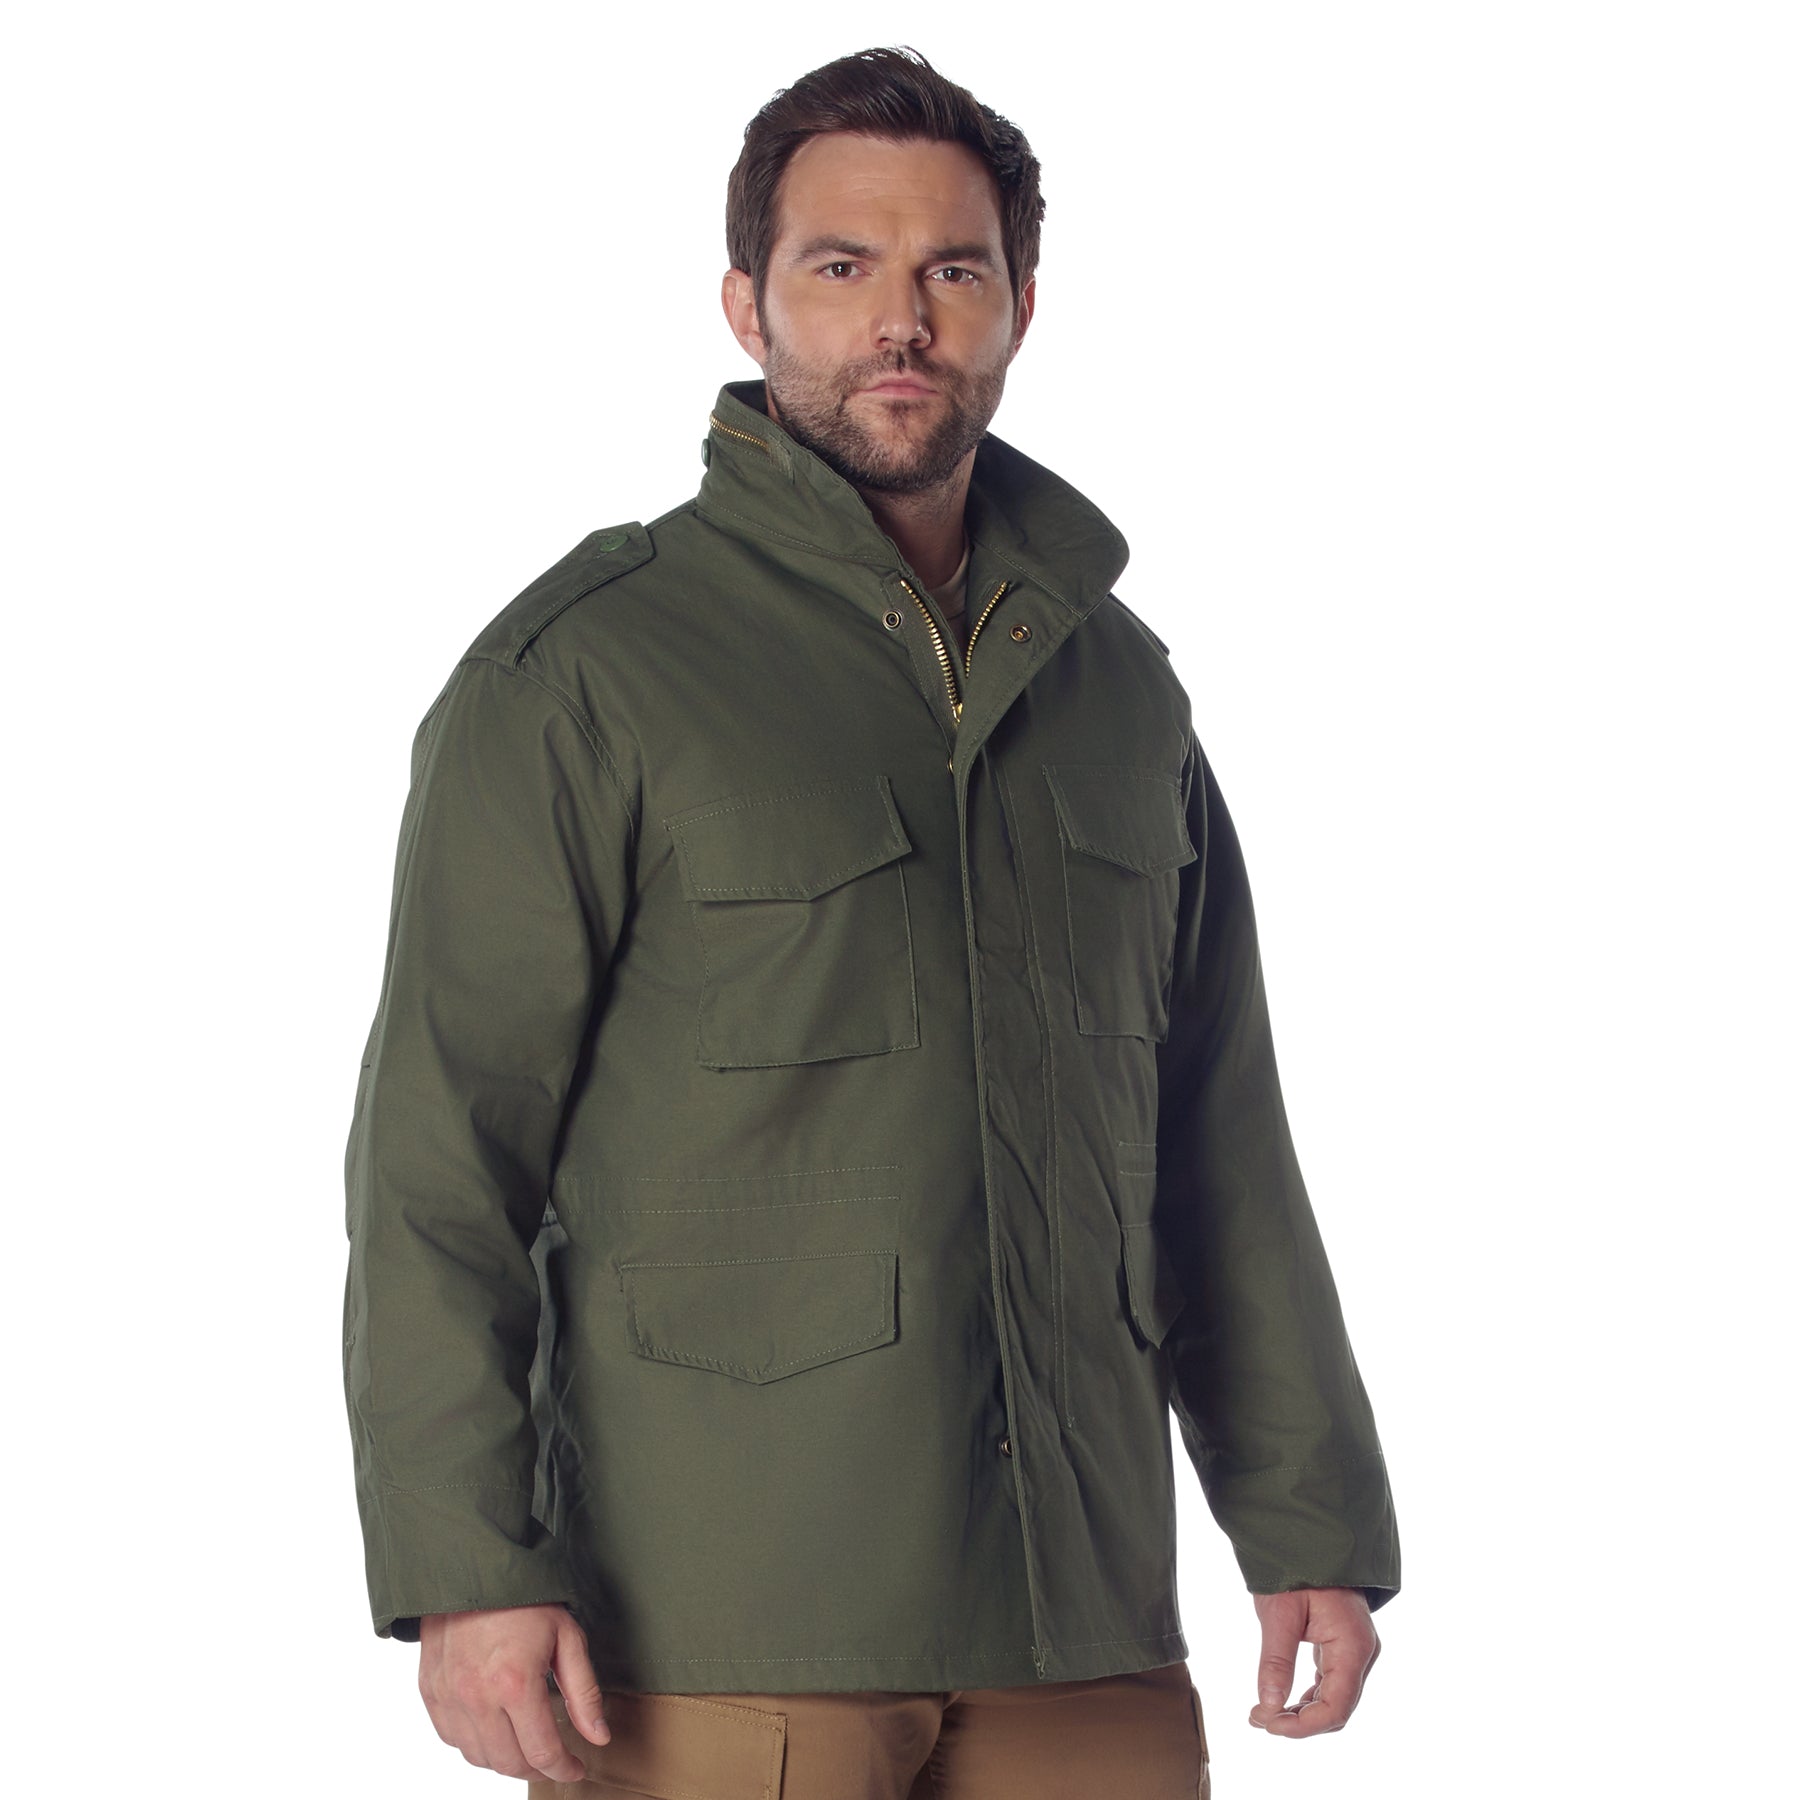 Poly/Cotton M-65 Field Jackets Olive Drab